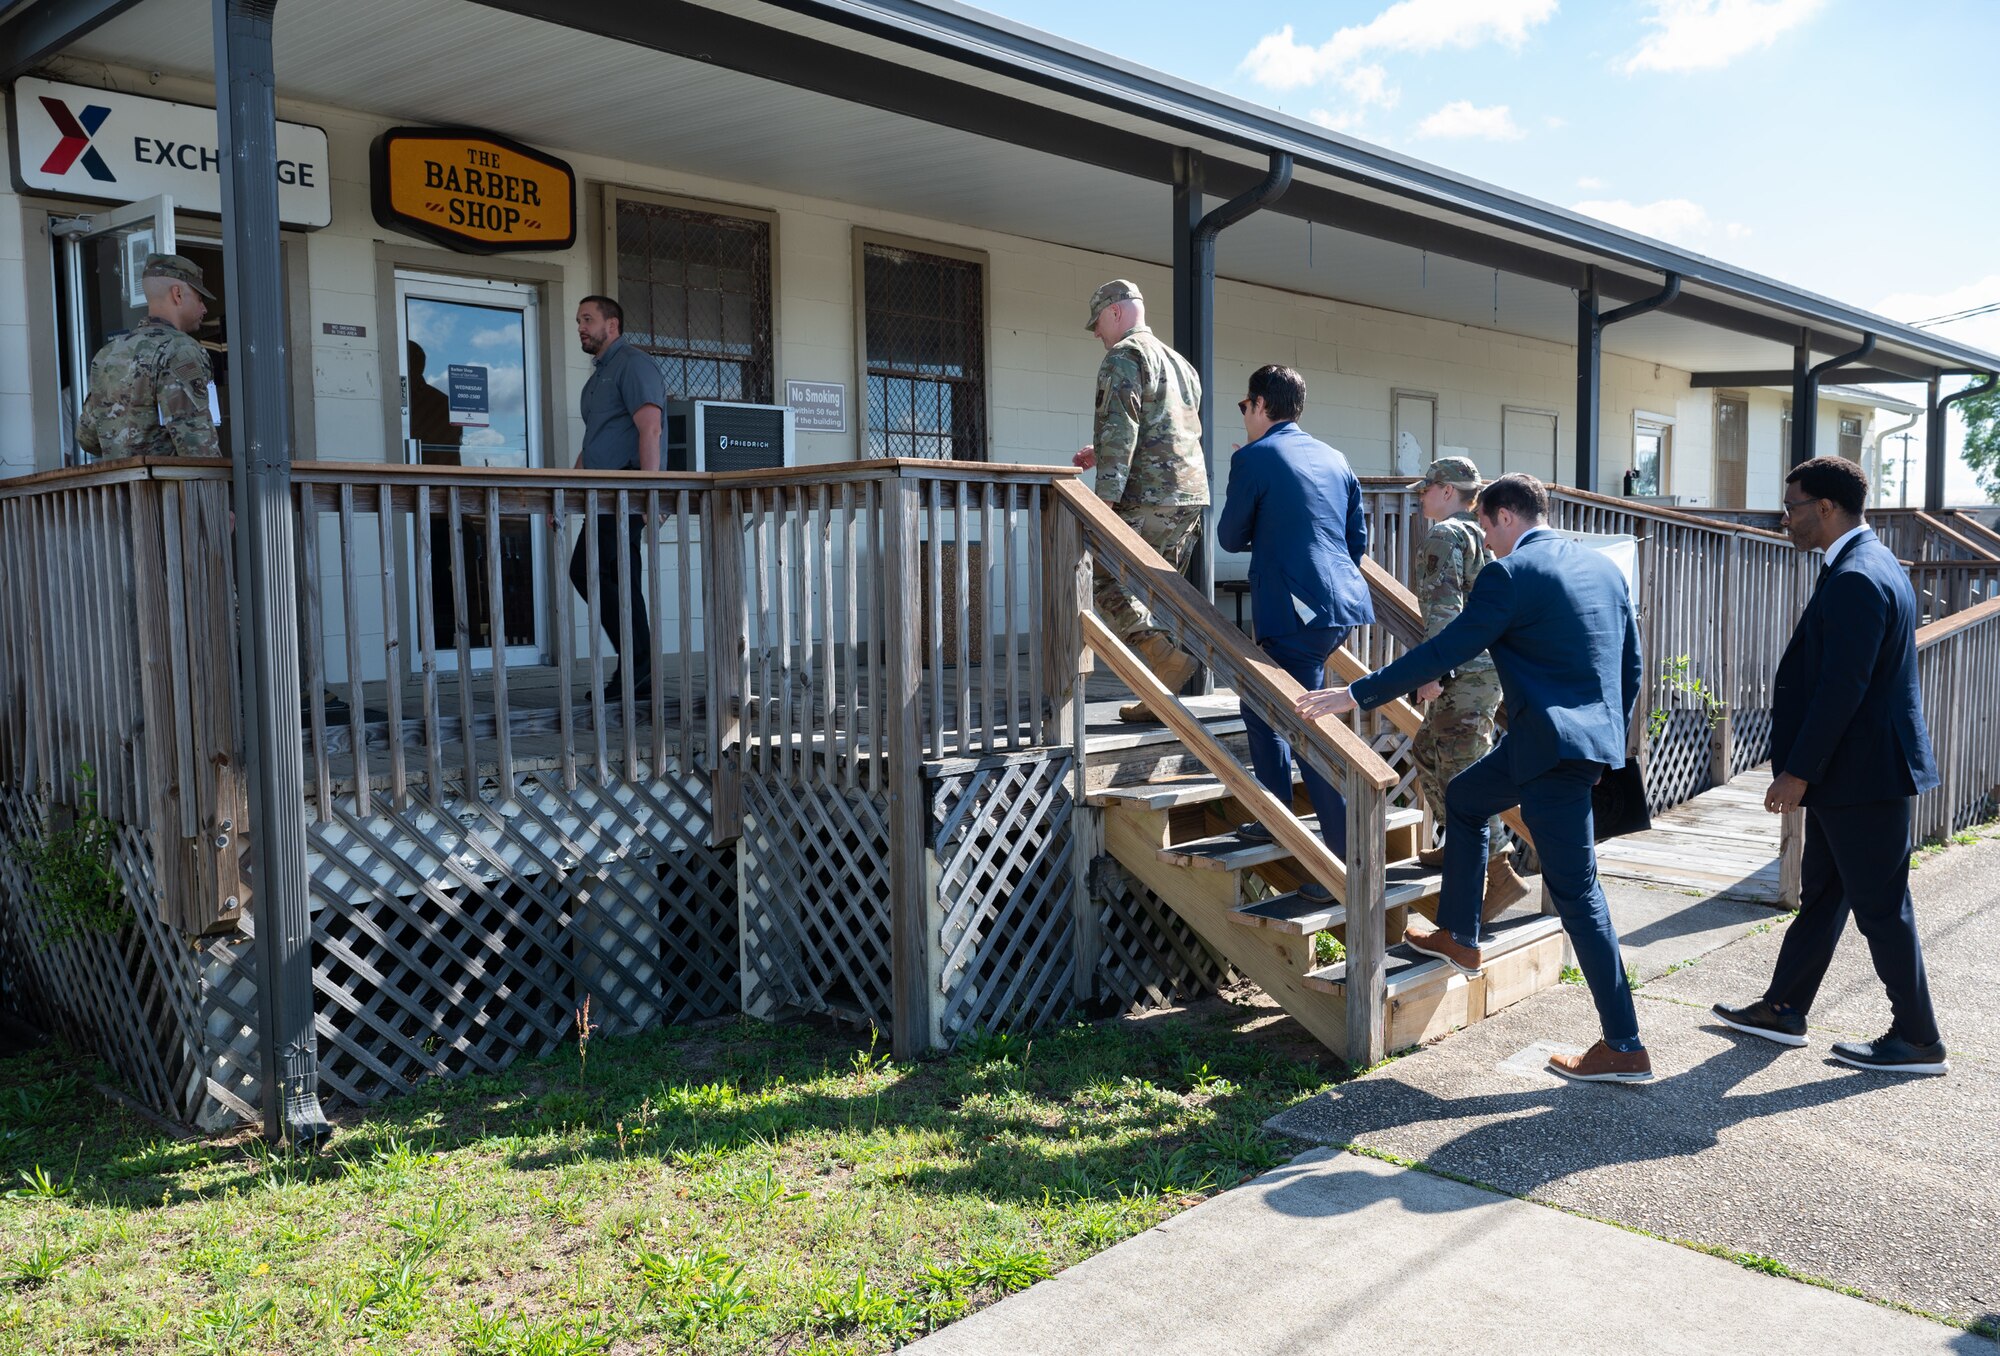 A military legislative assistant, military affairs director, and congressman follow an Air Force military commander up some wooden stairs outside leading to a shoppette